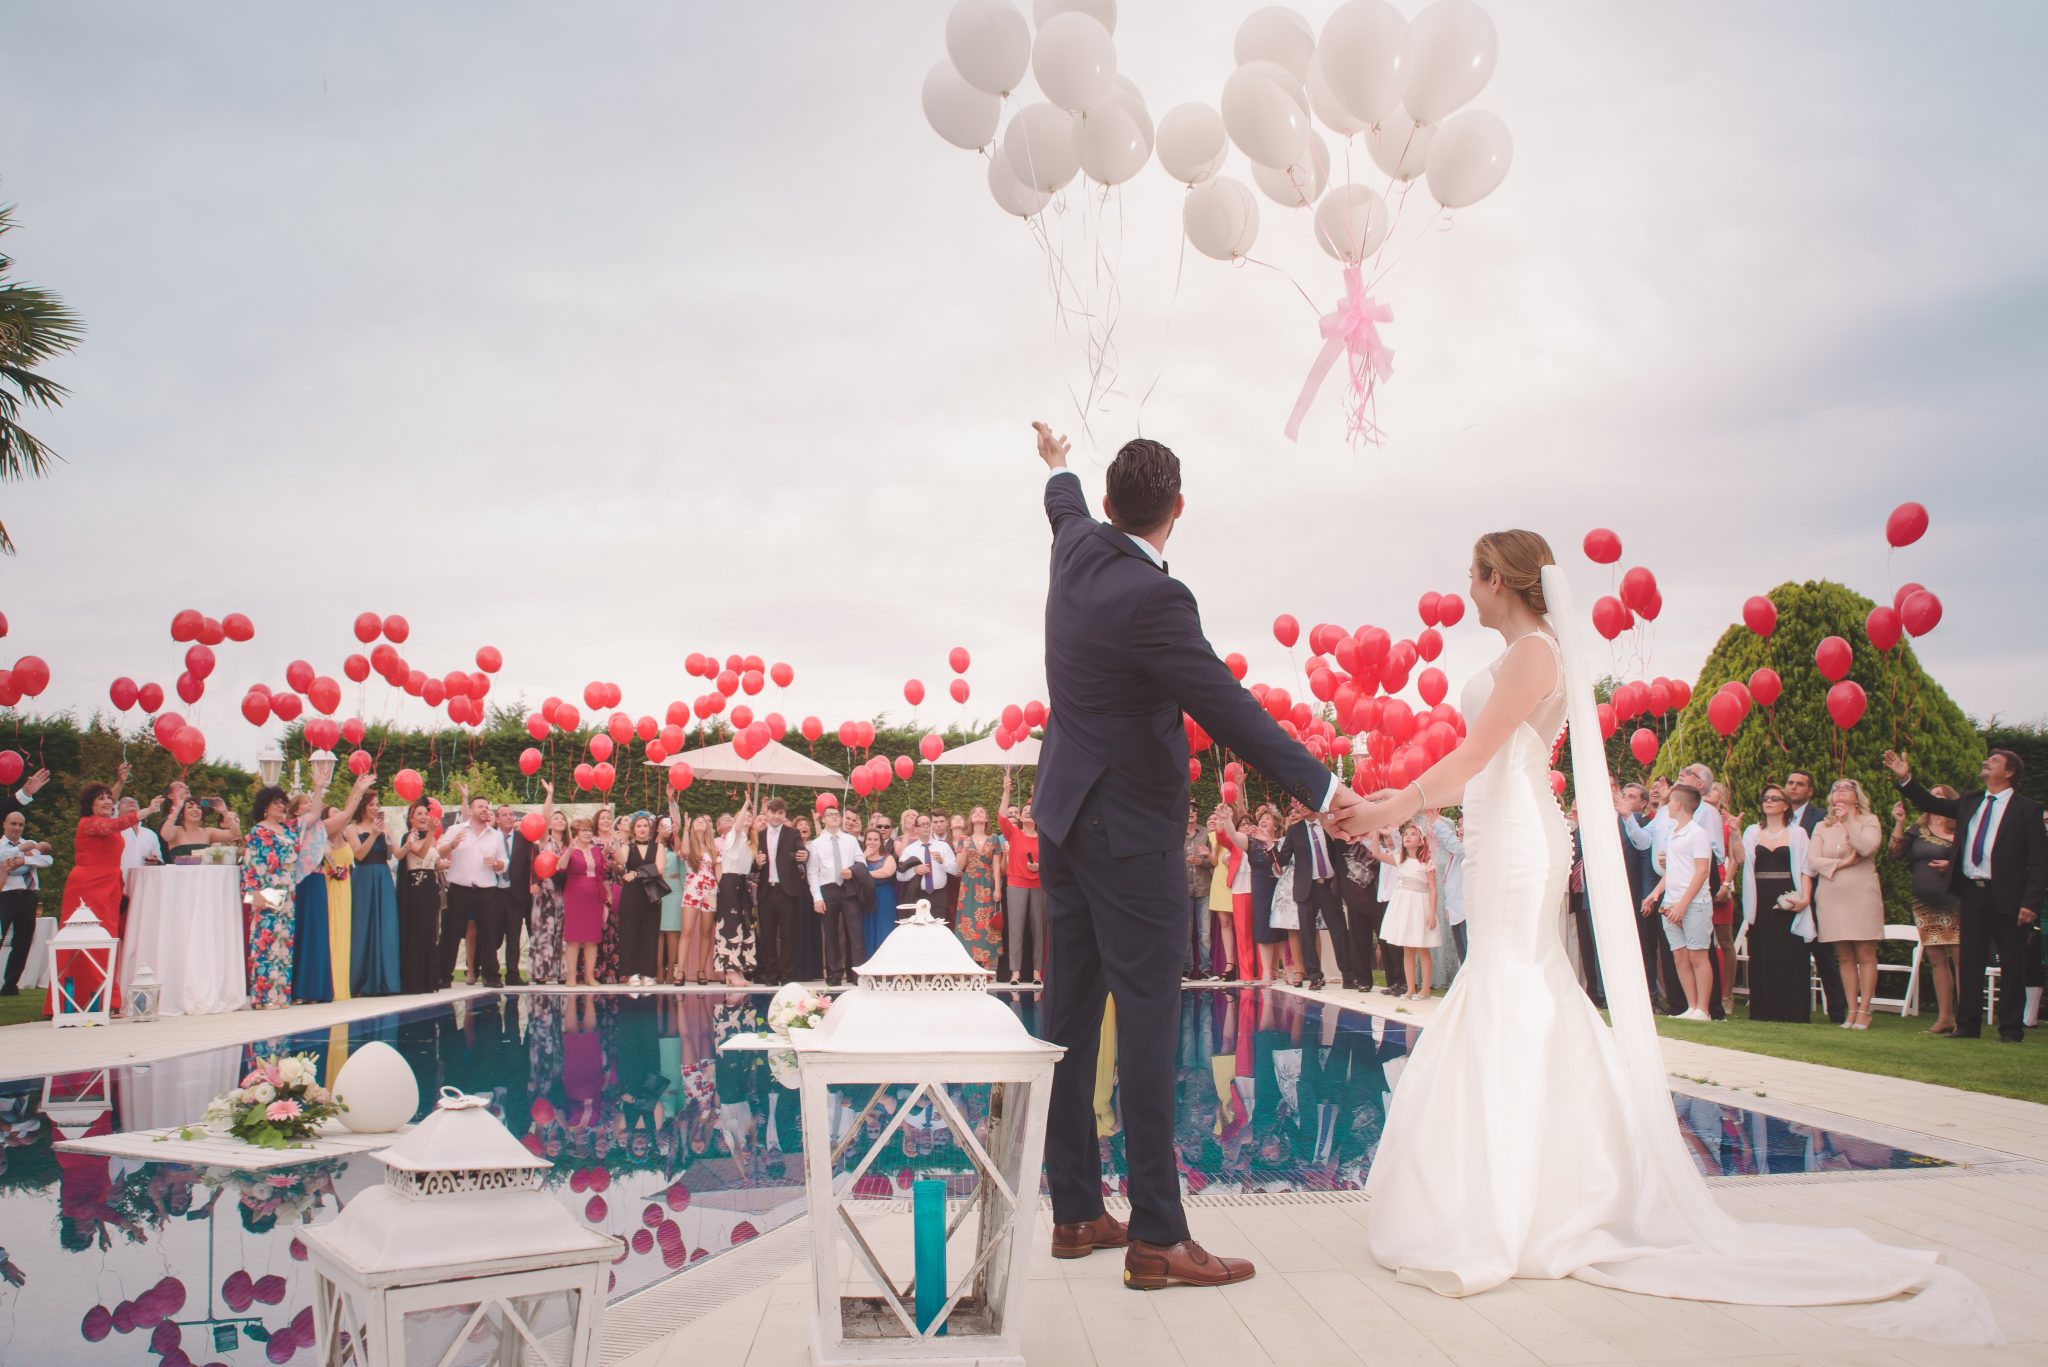 Couple getting married on Valentine's Dat with balloons